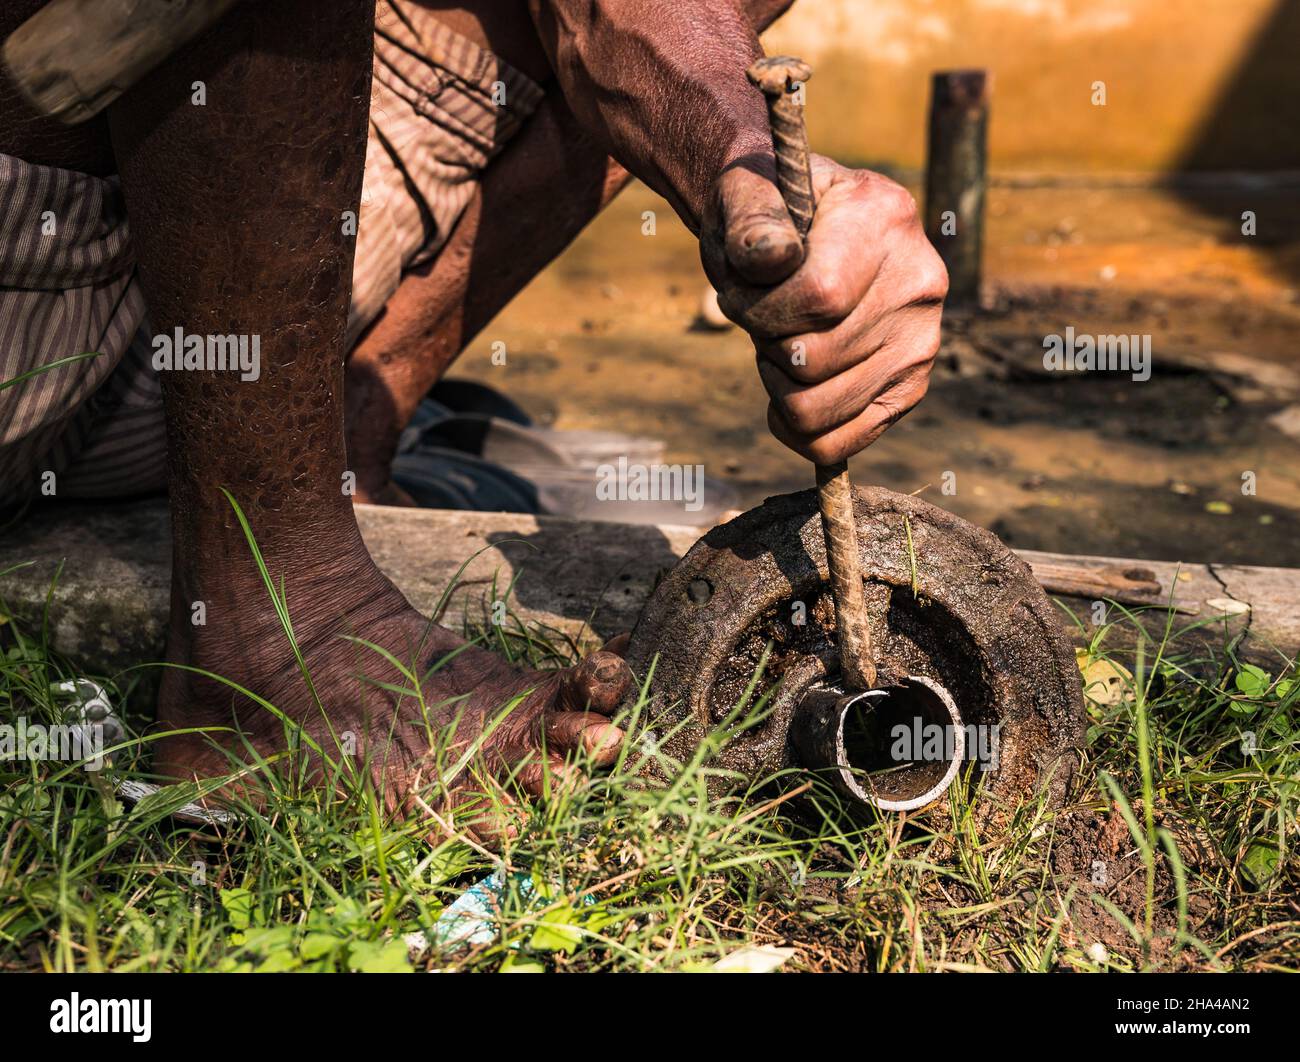 Tehatta, India. 08th Dec, 2021. A recent report published by the Reserve Bank of India (RBI) shows that the daily wage of rural workers in West Bengal is way below the national average. A worker is repairing a tubewell (hand pump) at Tehatta, West Bengal. (Photo by Soumyabrata Roy/Pacific Press) (Photo by Eric Dubost/Pacific Press) Credit: Pacific Press Media Production Corp./Alamy Live News Stock Photo